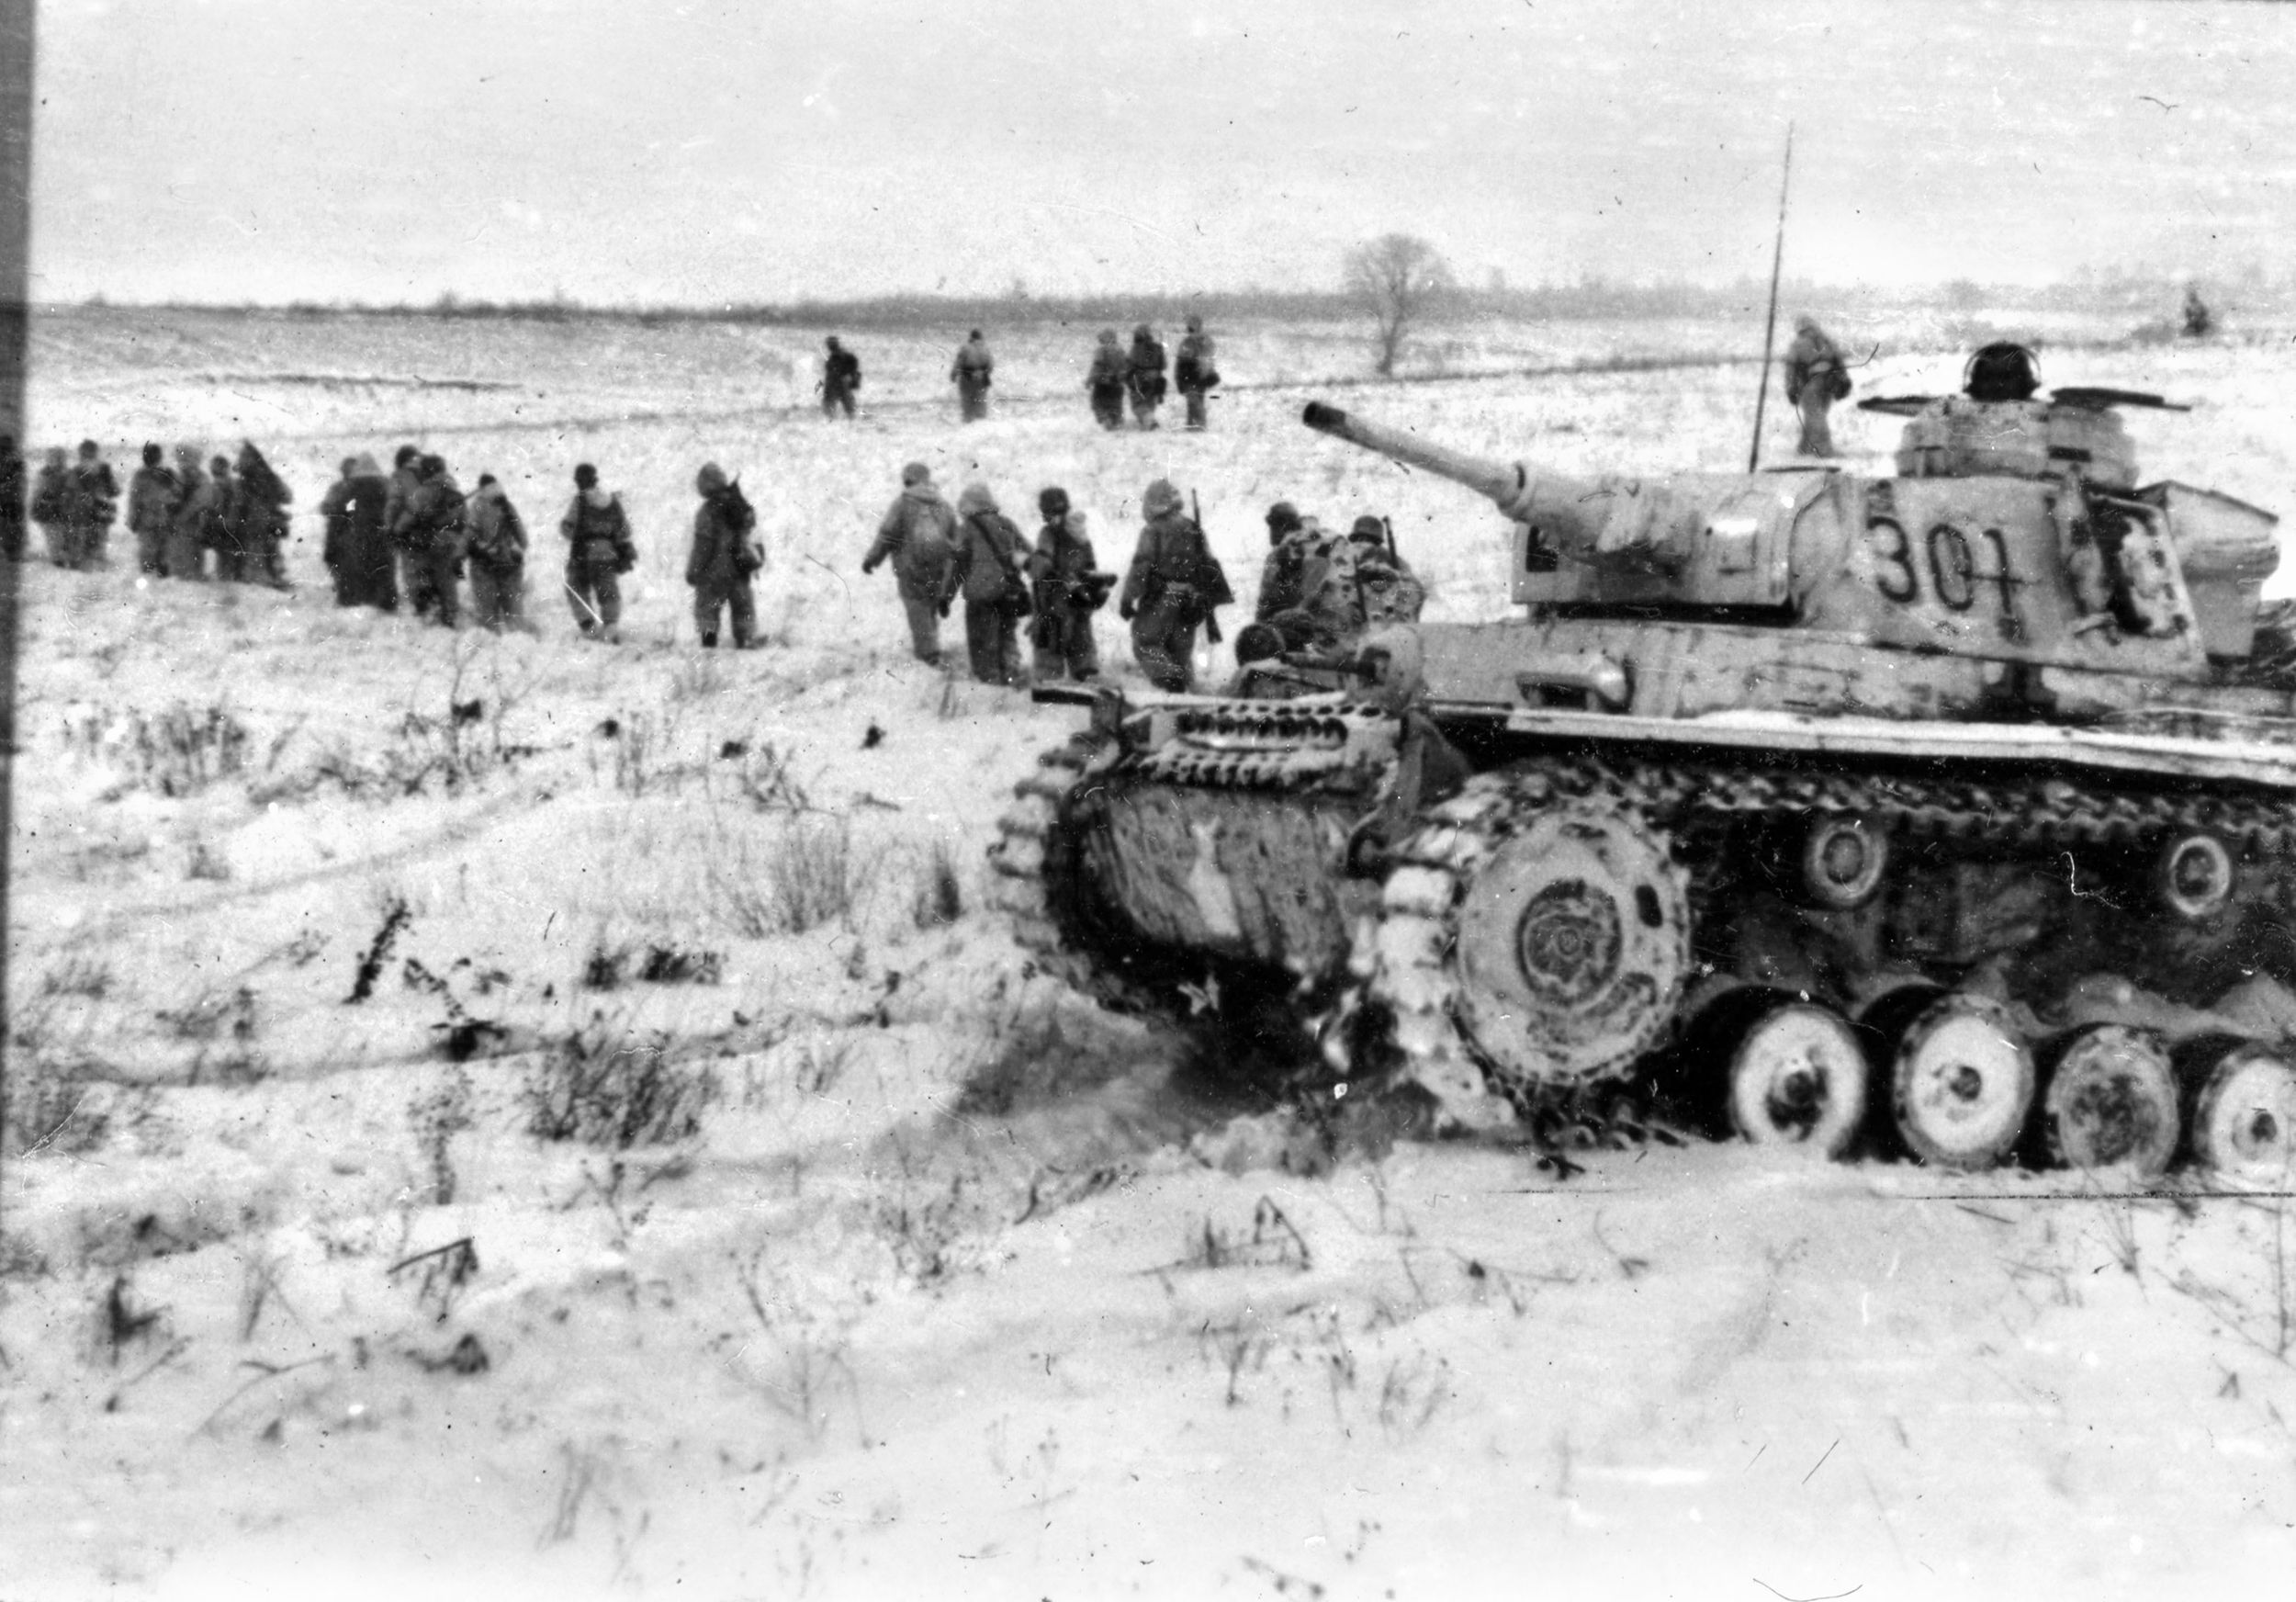 During the siege of Stalingrad in December 1942, Nazi panzergrenadiers trudge through snow and ice past one of their tanks that has paused momentarily. The bitter cold inhibited the operations of mechanized equipment.